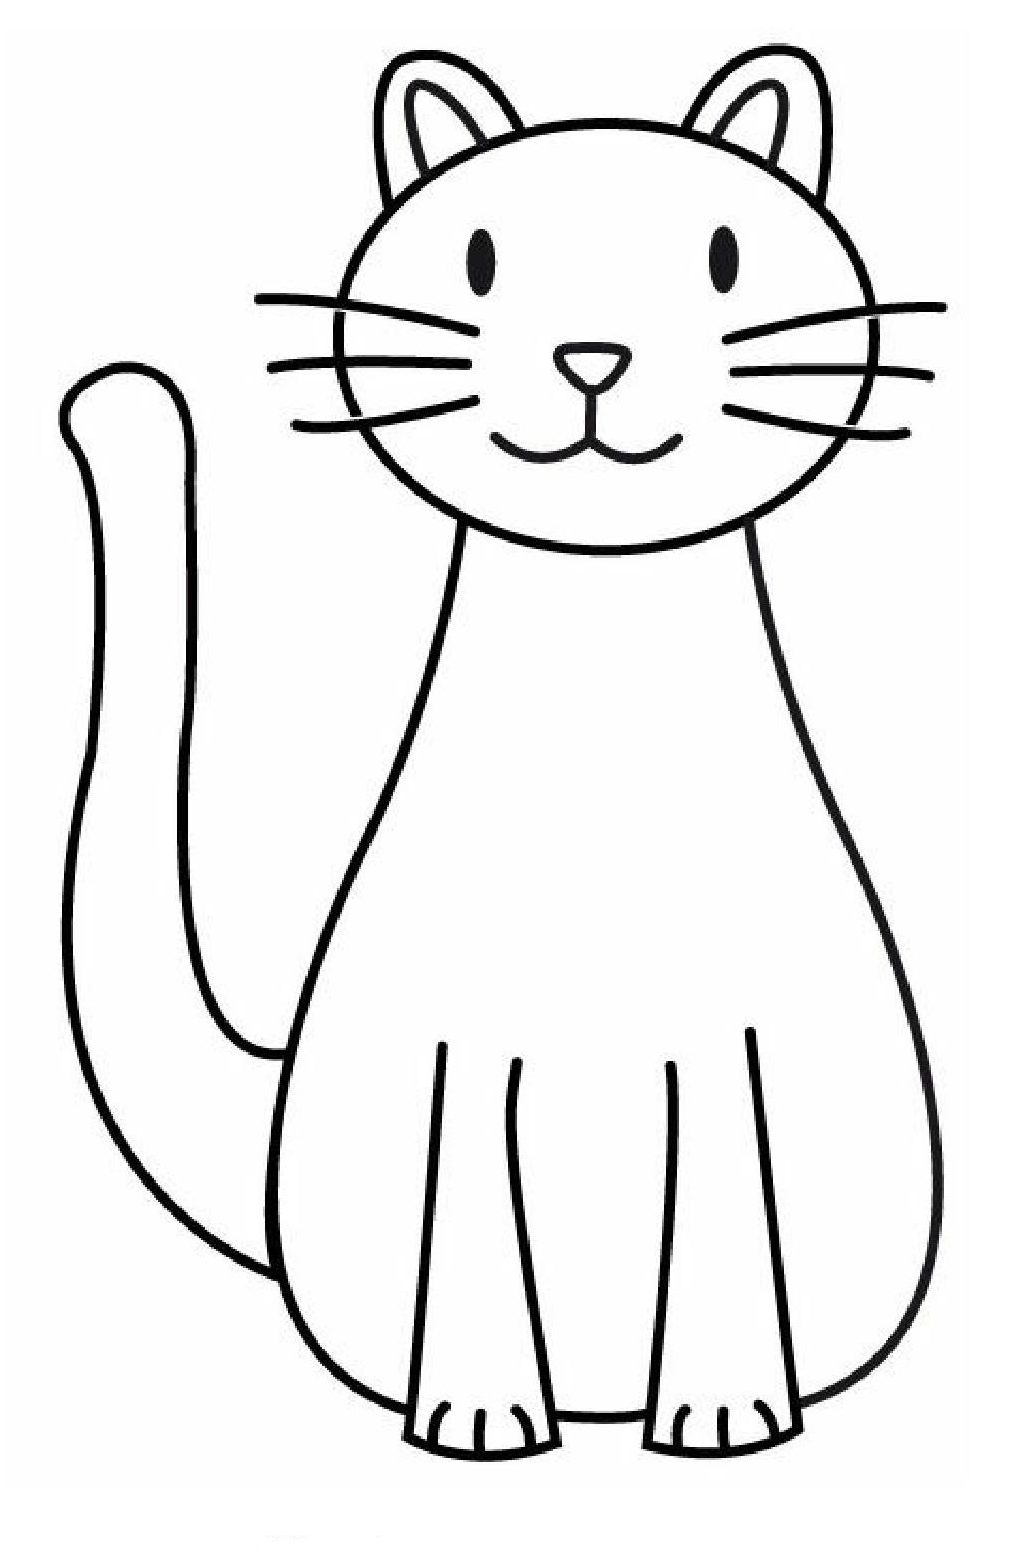 Easy cat coloring sheets for kids to printable. cute easy coloring page to print